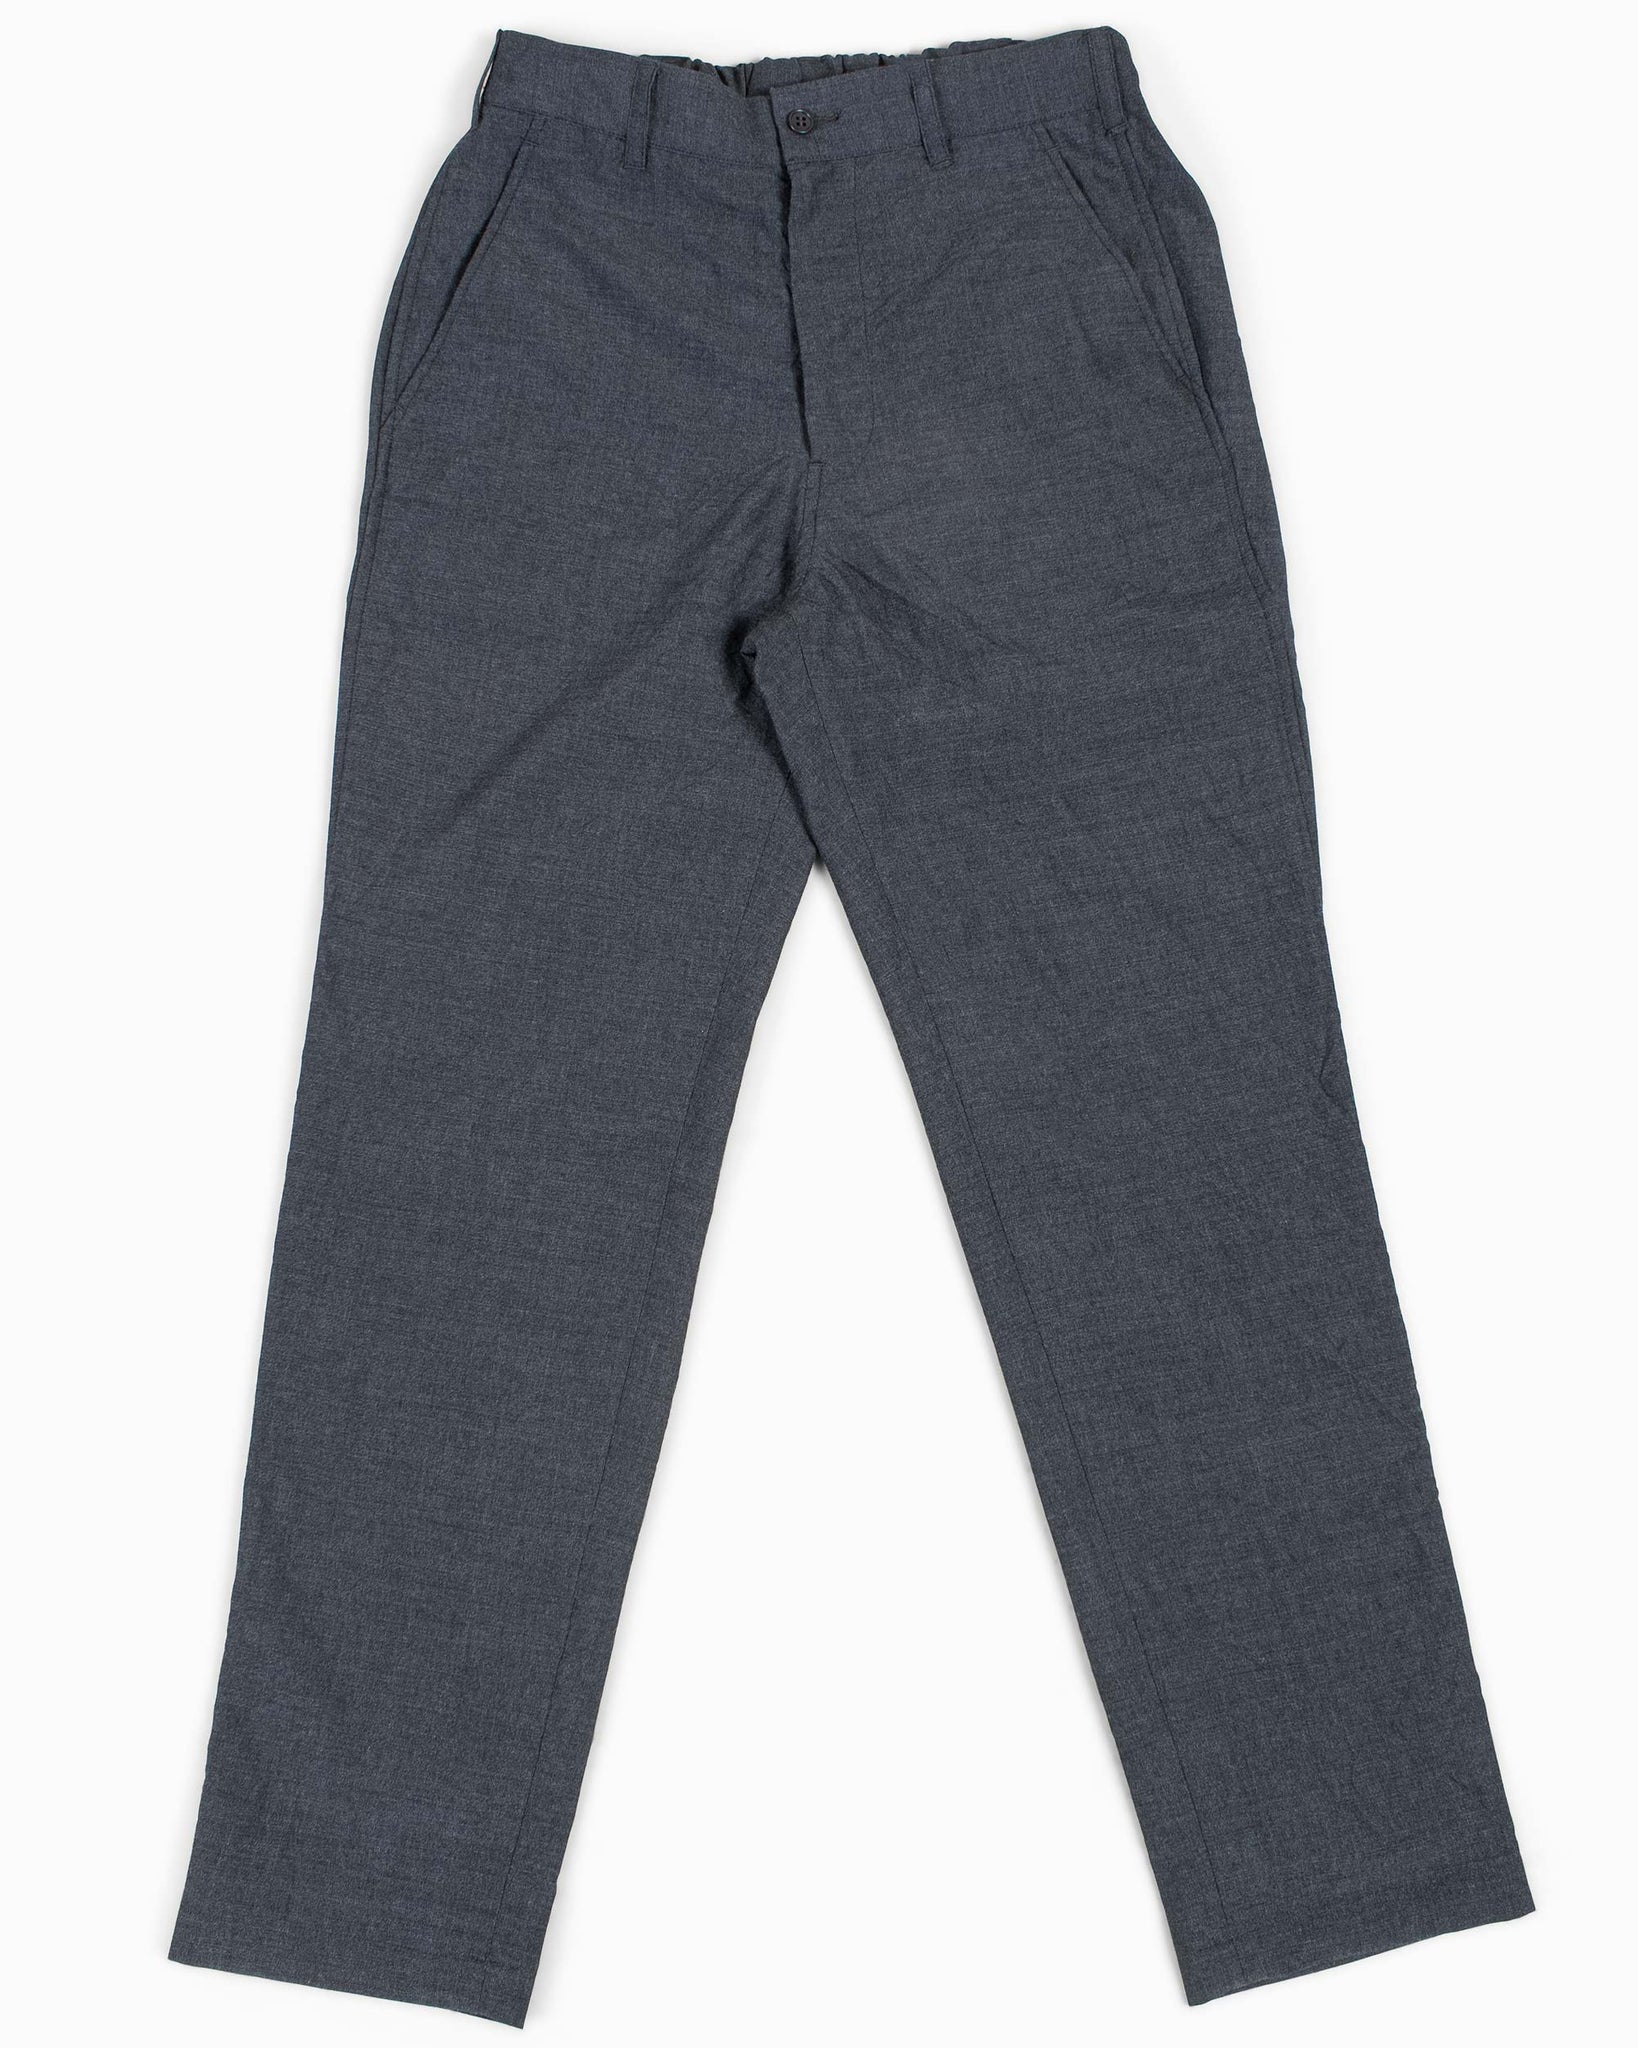 Sage de Cret Tapered Pants Charcoal Wool Washer